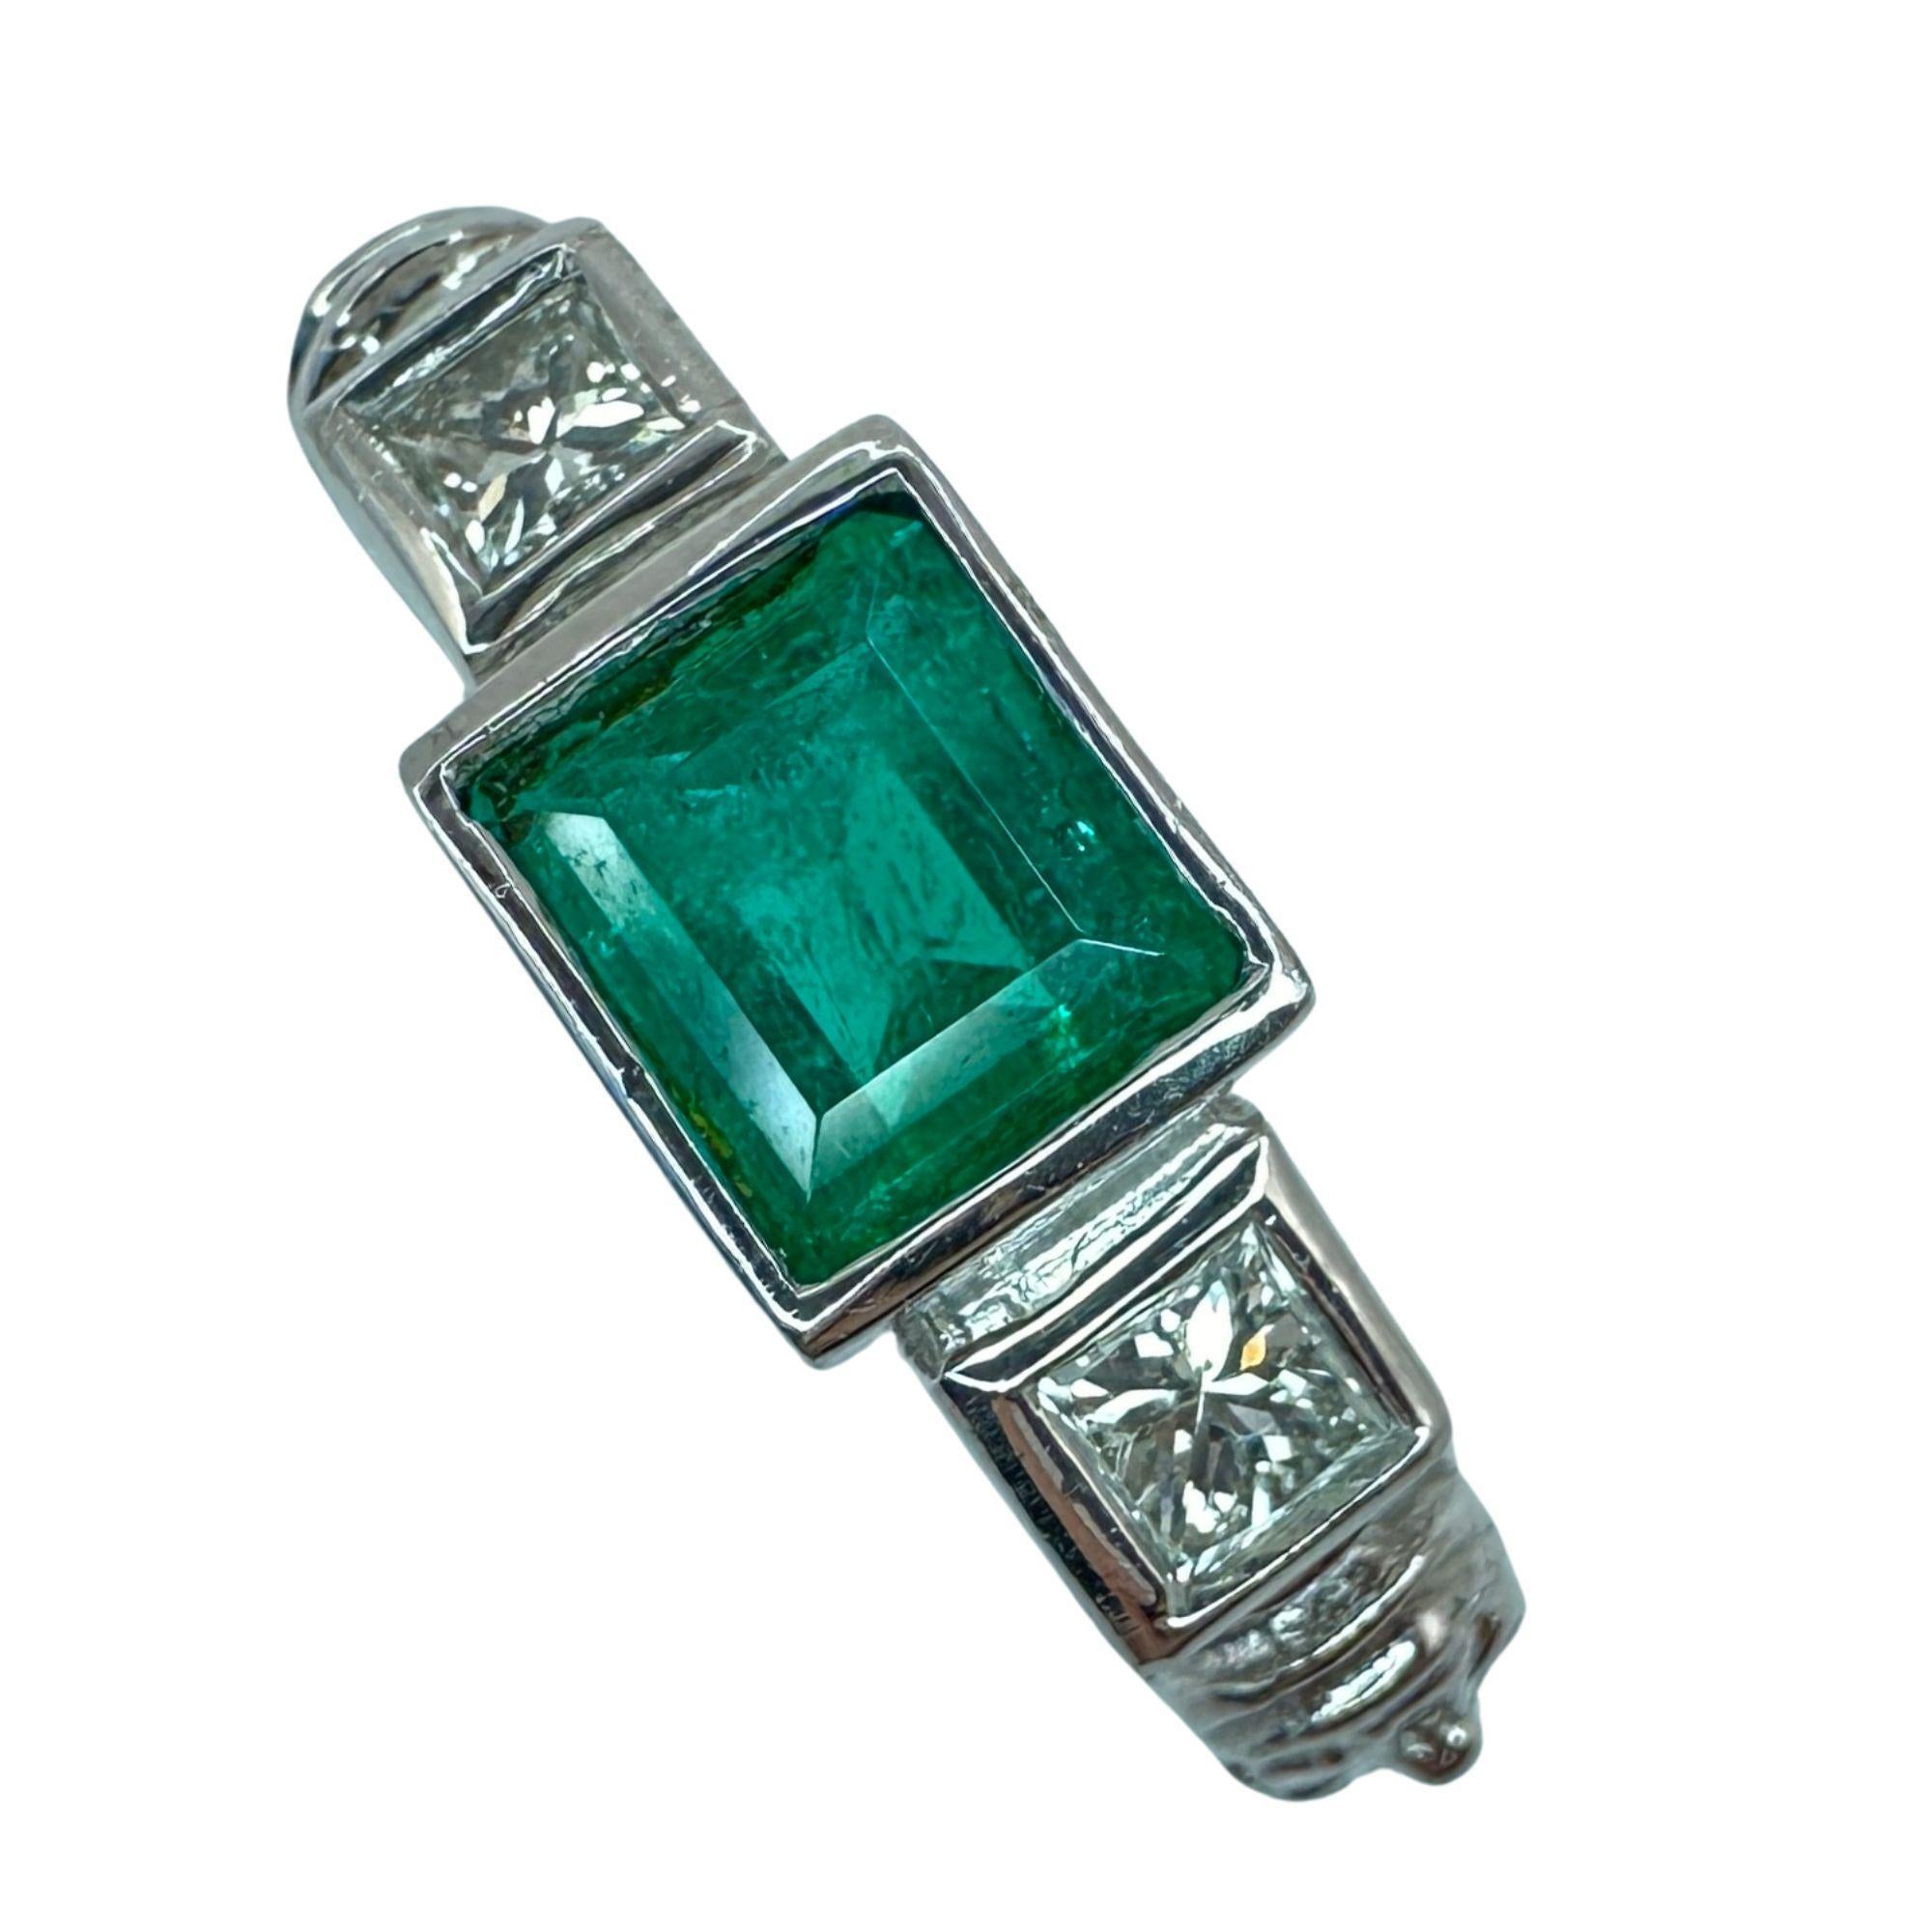 This 18k diamond and emerald ring is perfect for everyday wear.It weighs 6.88 grams and is a size 6.75. The center emerald weighs 0.70 carats and is accompanied by two side diamonds weighing a total of 0.28 carats, providing a subtle yet elegant